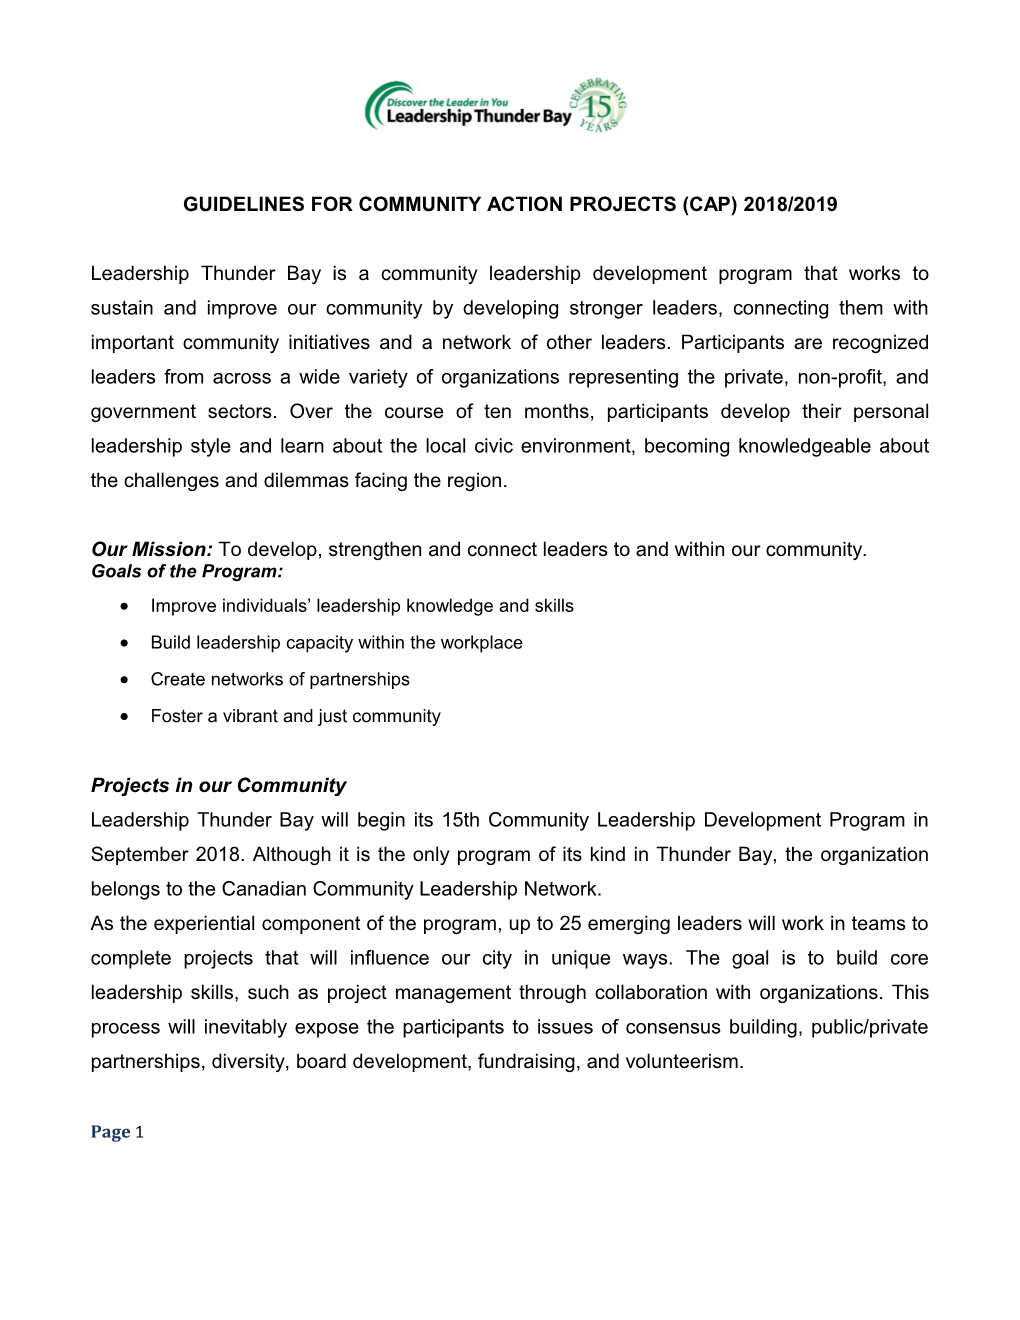 Guidelines for Community Action Projects (Cap) 2018/2019